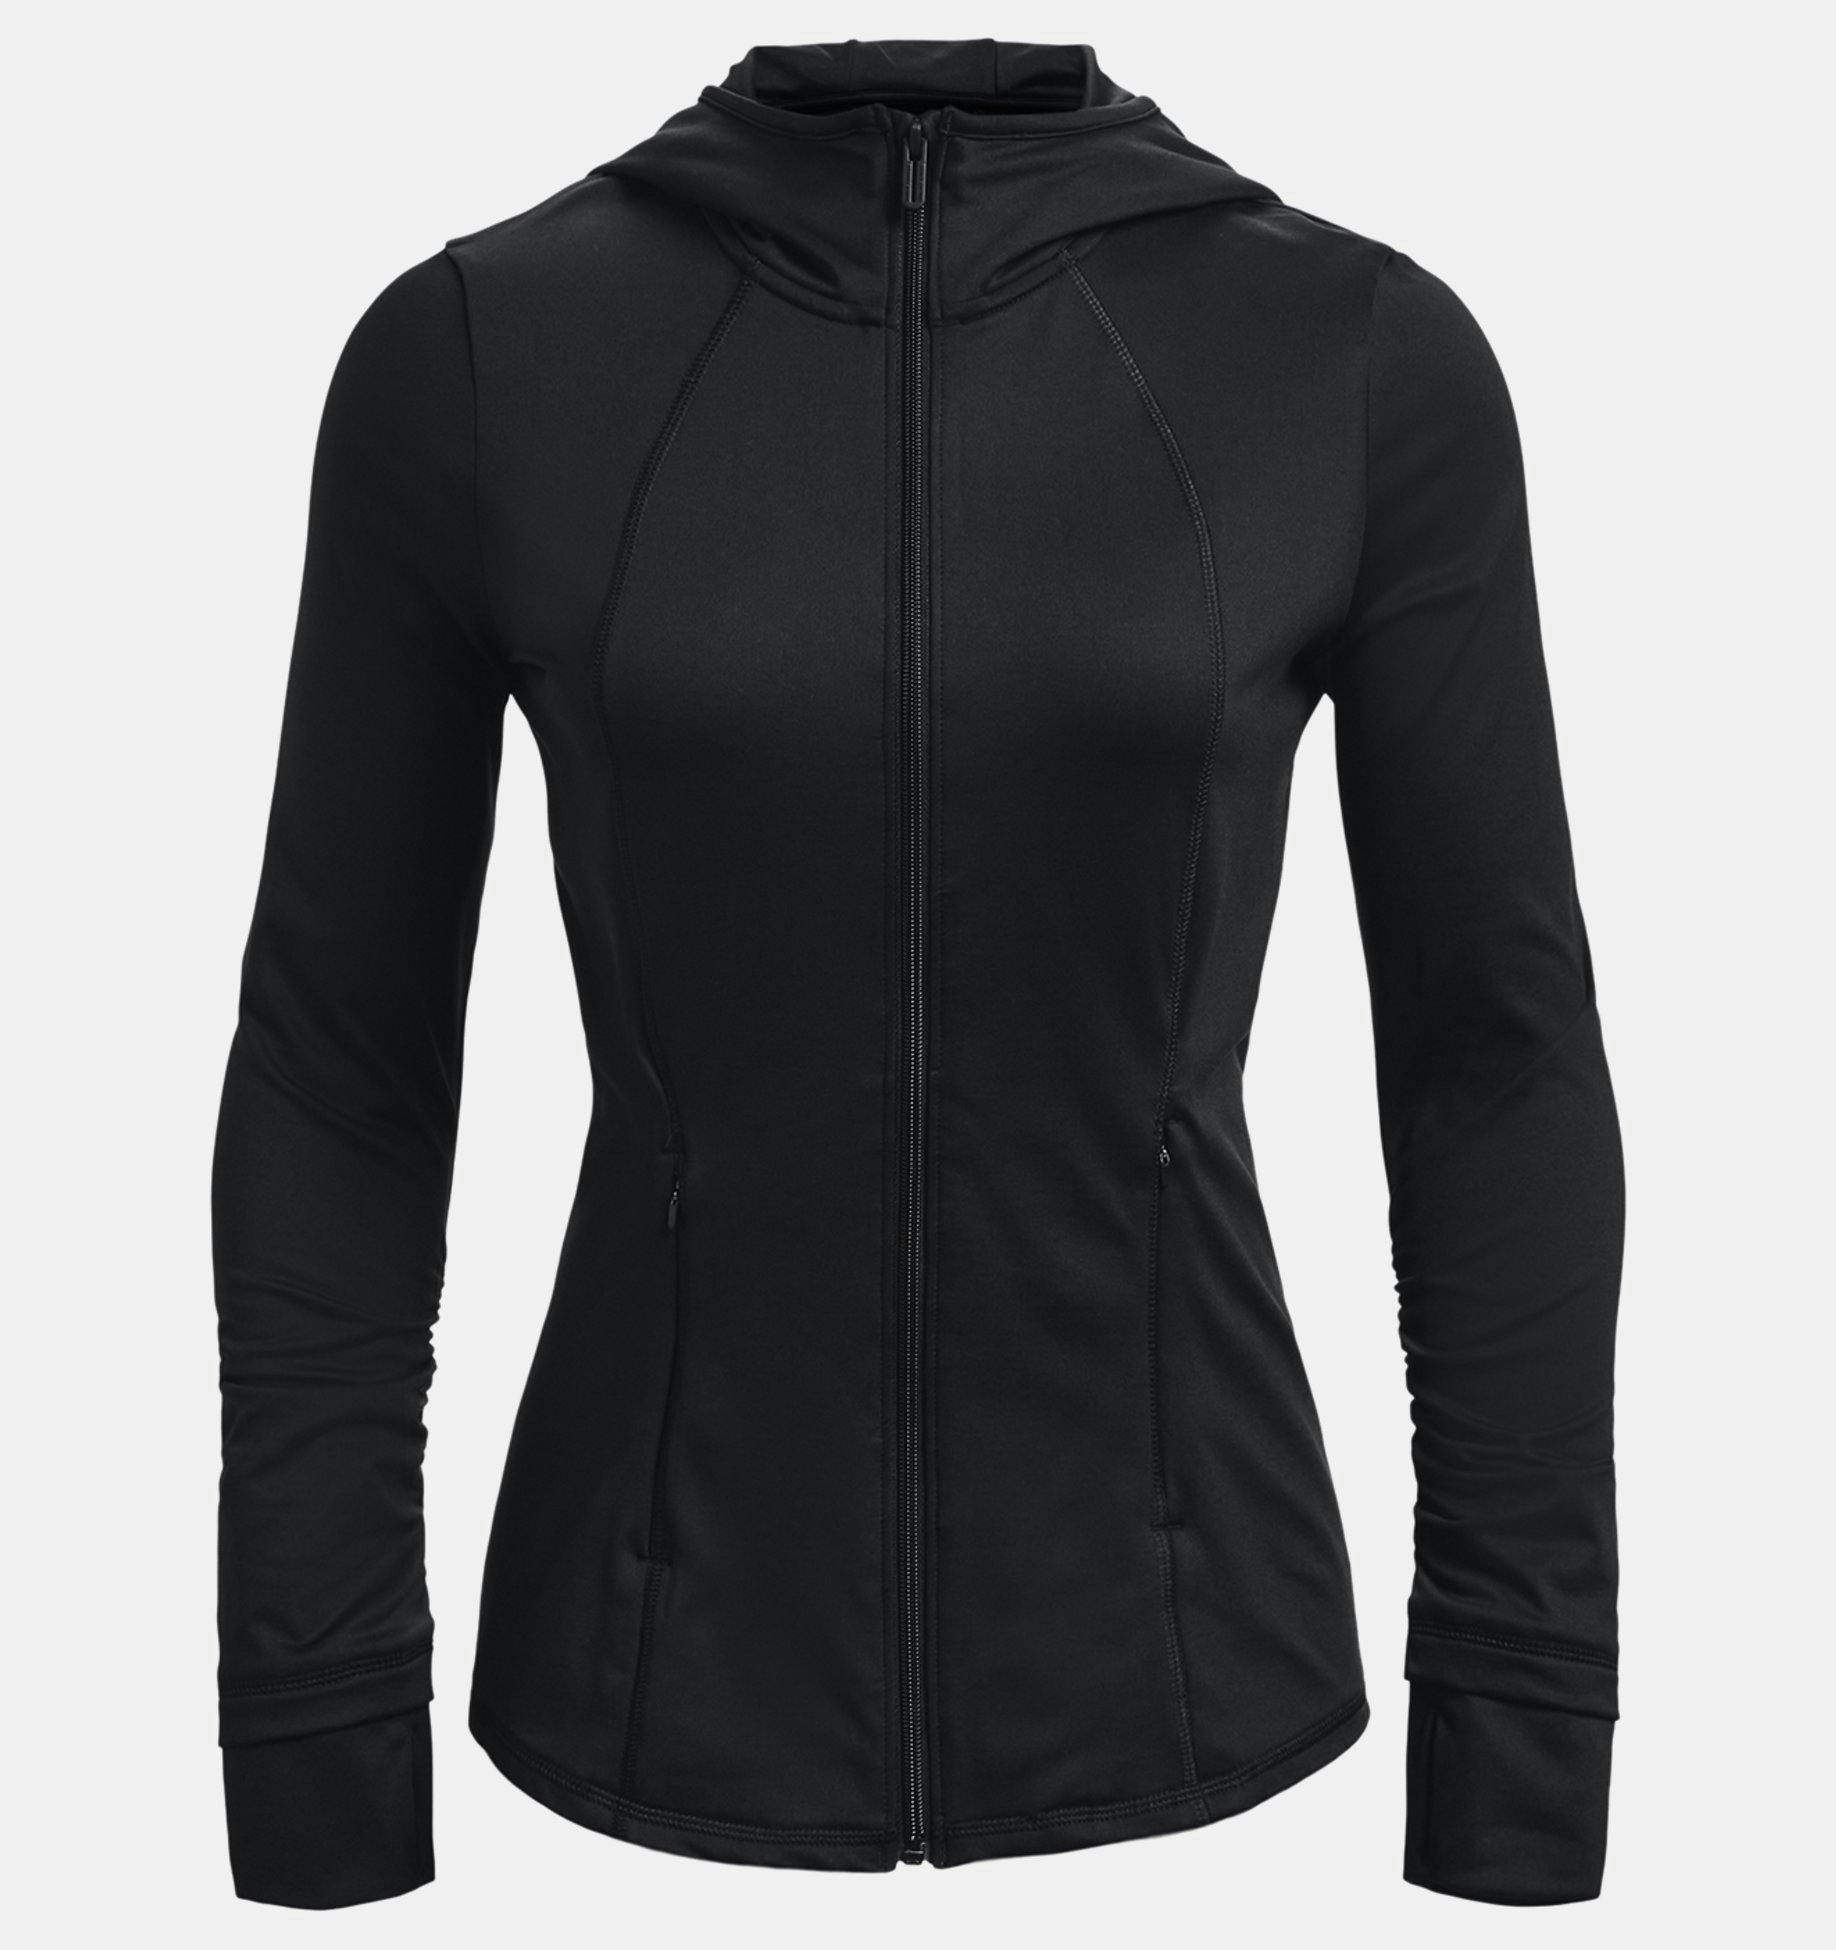 Under Armour Women's Meridian Cold Weather Jacket